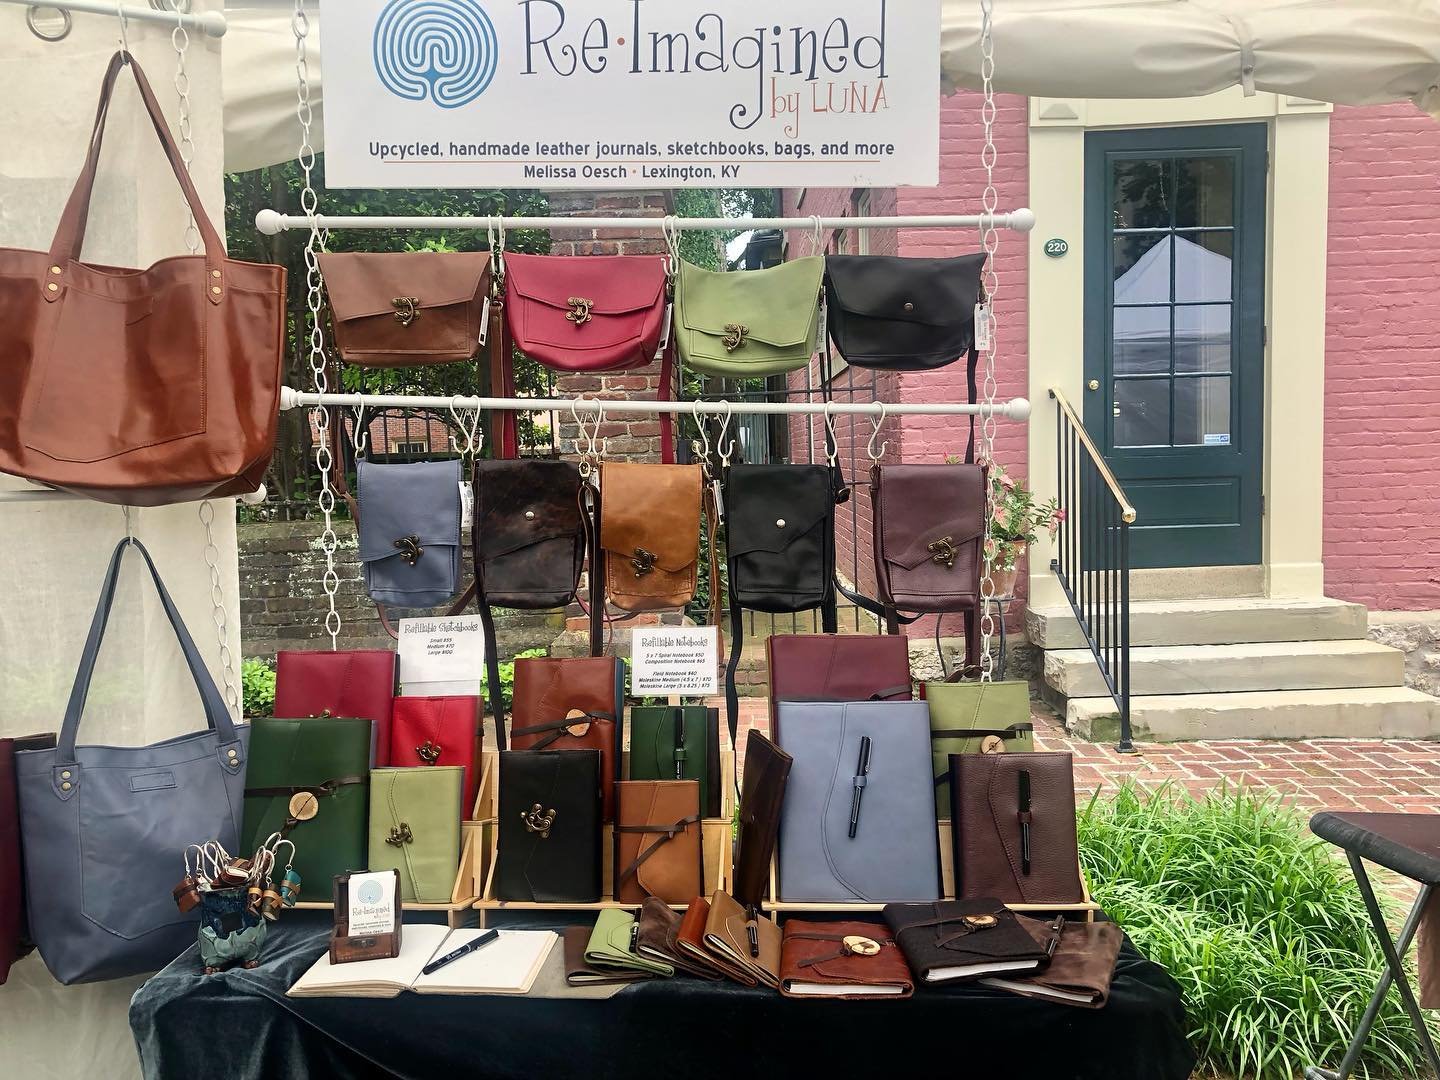 Mayfest Arts Fair is happening now! We&rsquo;re in Gratz Park in downtown Lexington, KY. There is music, food, and about 70 artists. We&rsquo;re open Sat 10-6 and Sun 11-5. I&rsquo;m on Market St. next to the Carnegie Center. Just look for the pink h